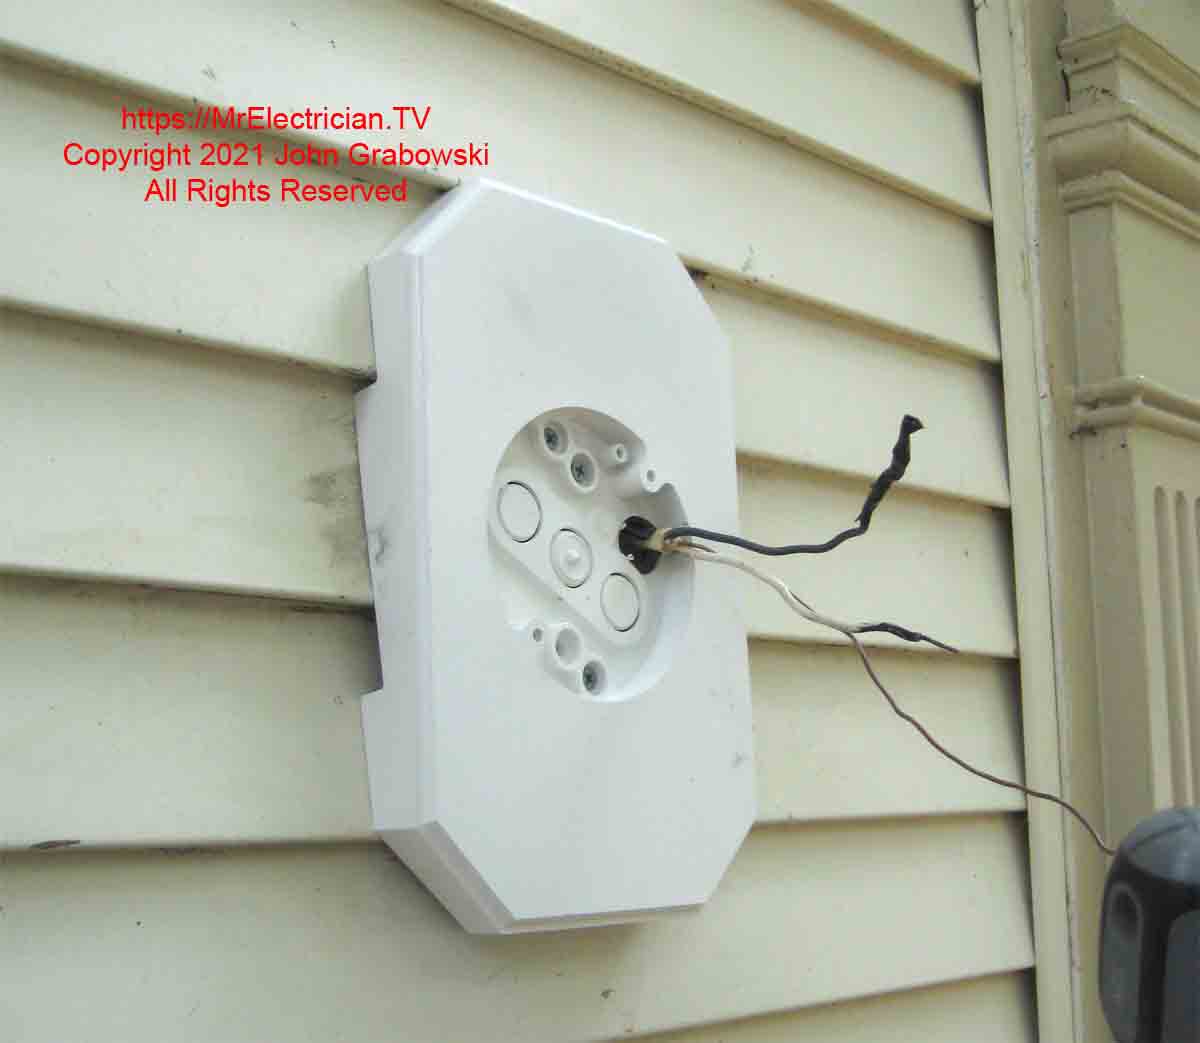 A siding box is used to mount a light fixture on vinyl siding outside.